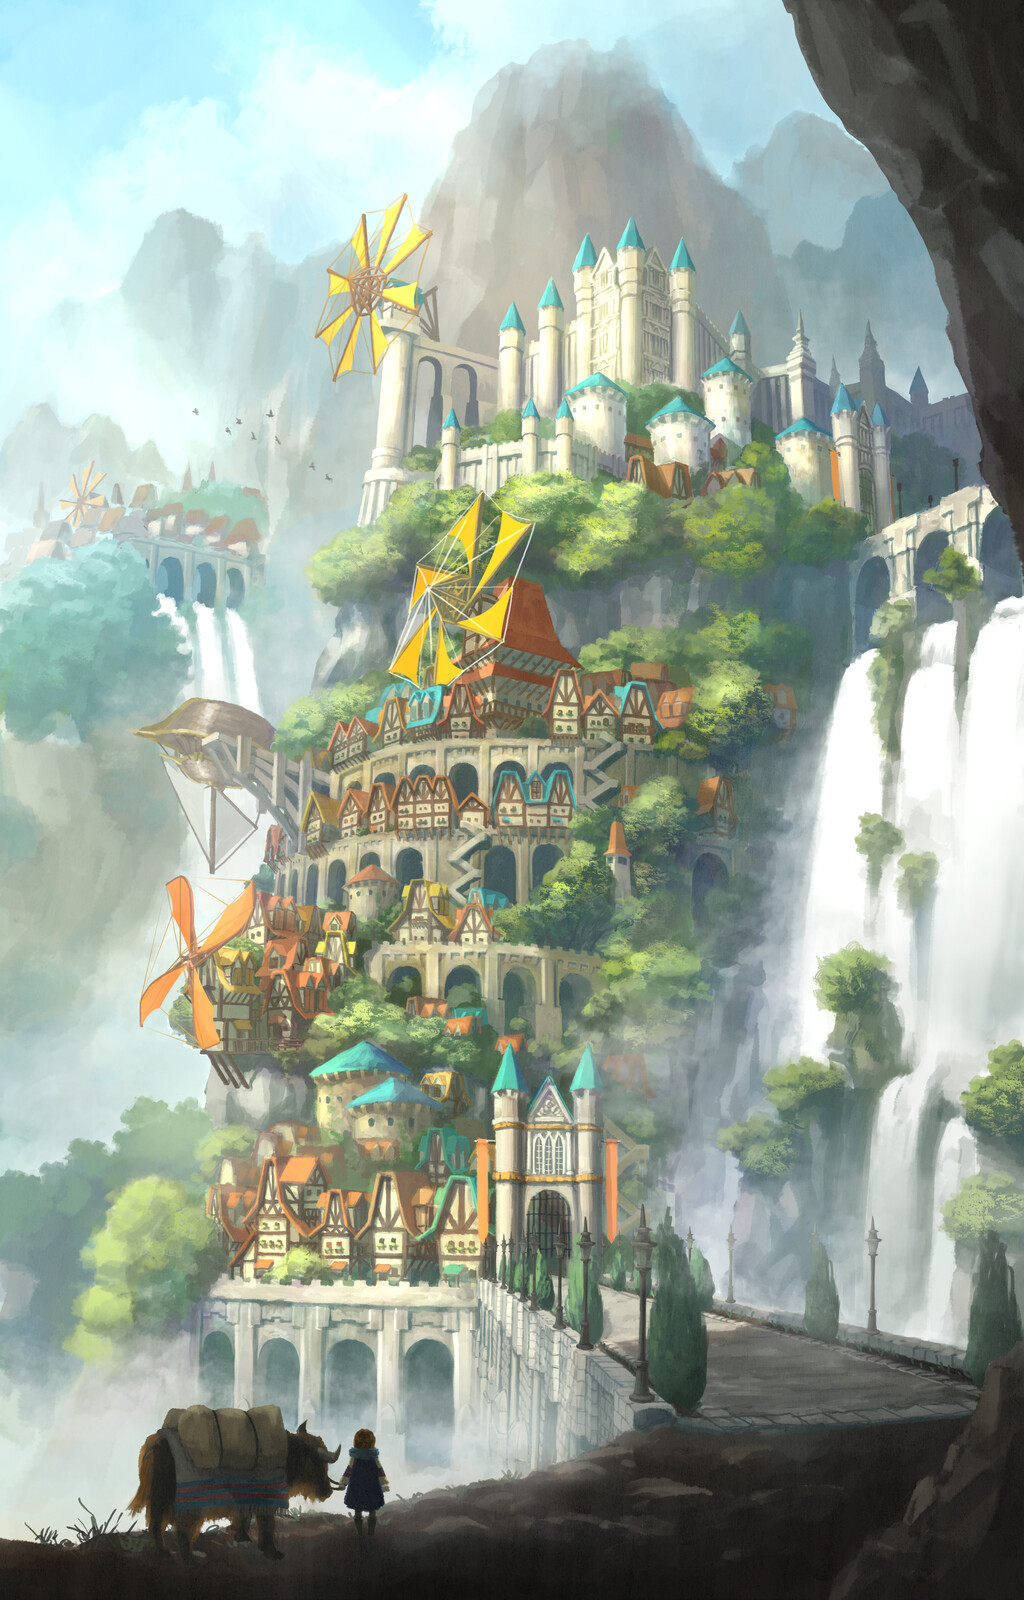 Cliff City -a scene of waterfall-